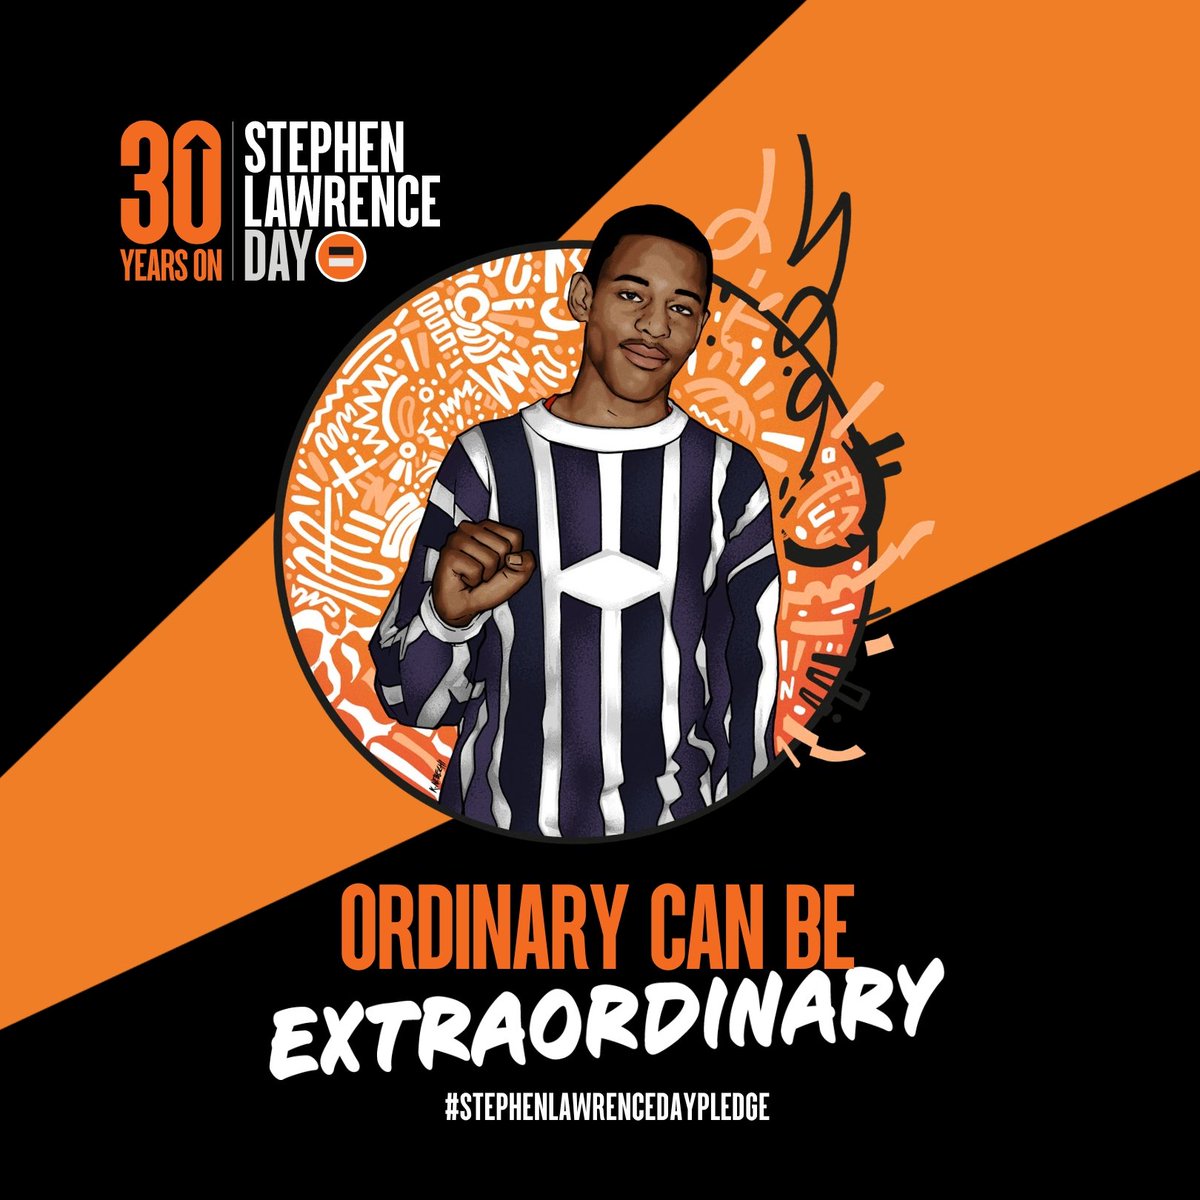 So many lives touched by Stephen's murder. So many still fighting for change.

This Stephen Lawrence Day I pledge to keep speaking up, challenging and working to dismantle racist systems to make sure the next 30 years look different from the last.

#stephenlawrencedaypledge